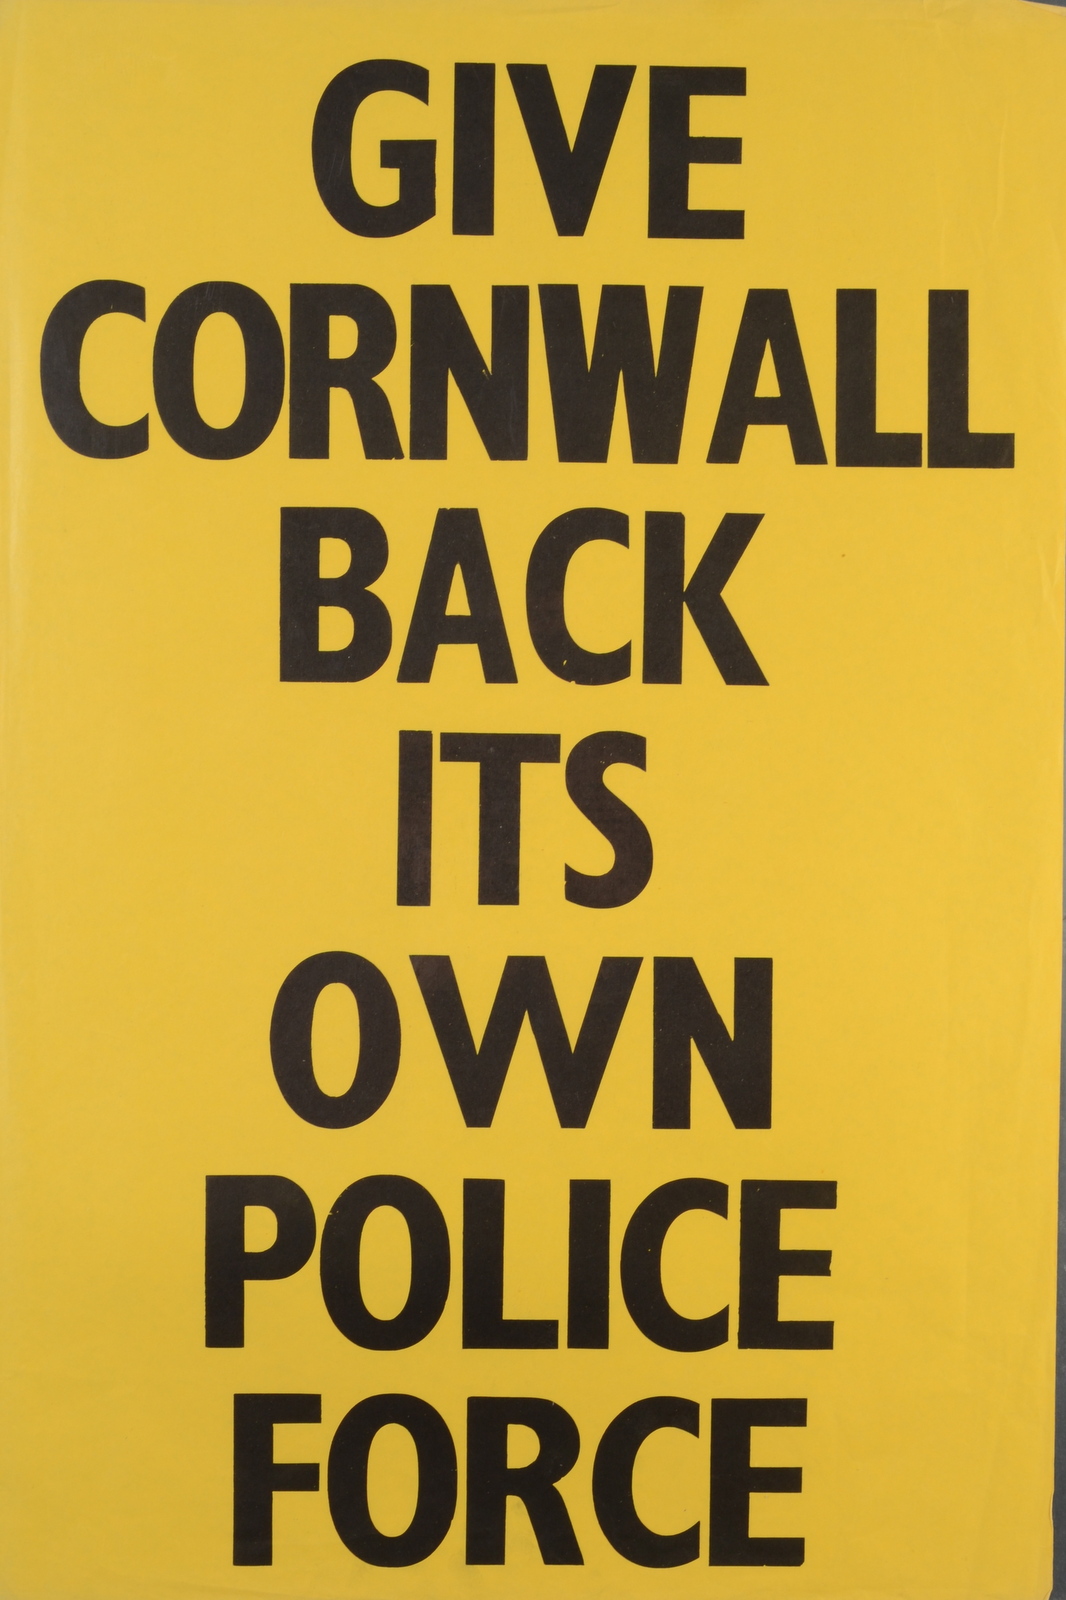 Cornish Political Posters 5 pieces 76 x 51cm - Image 5 of 5